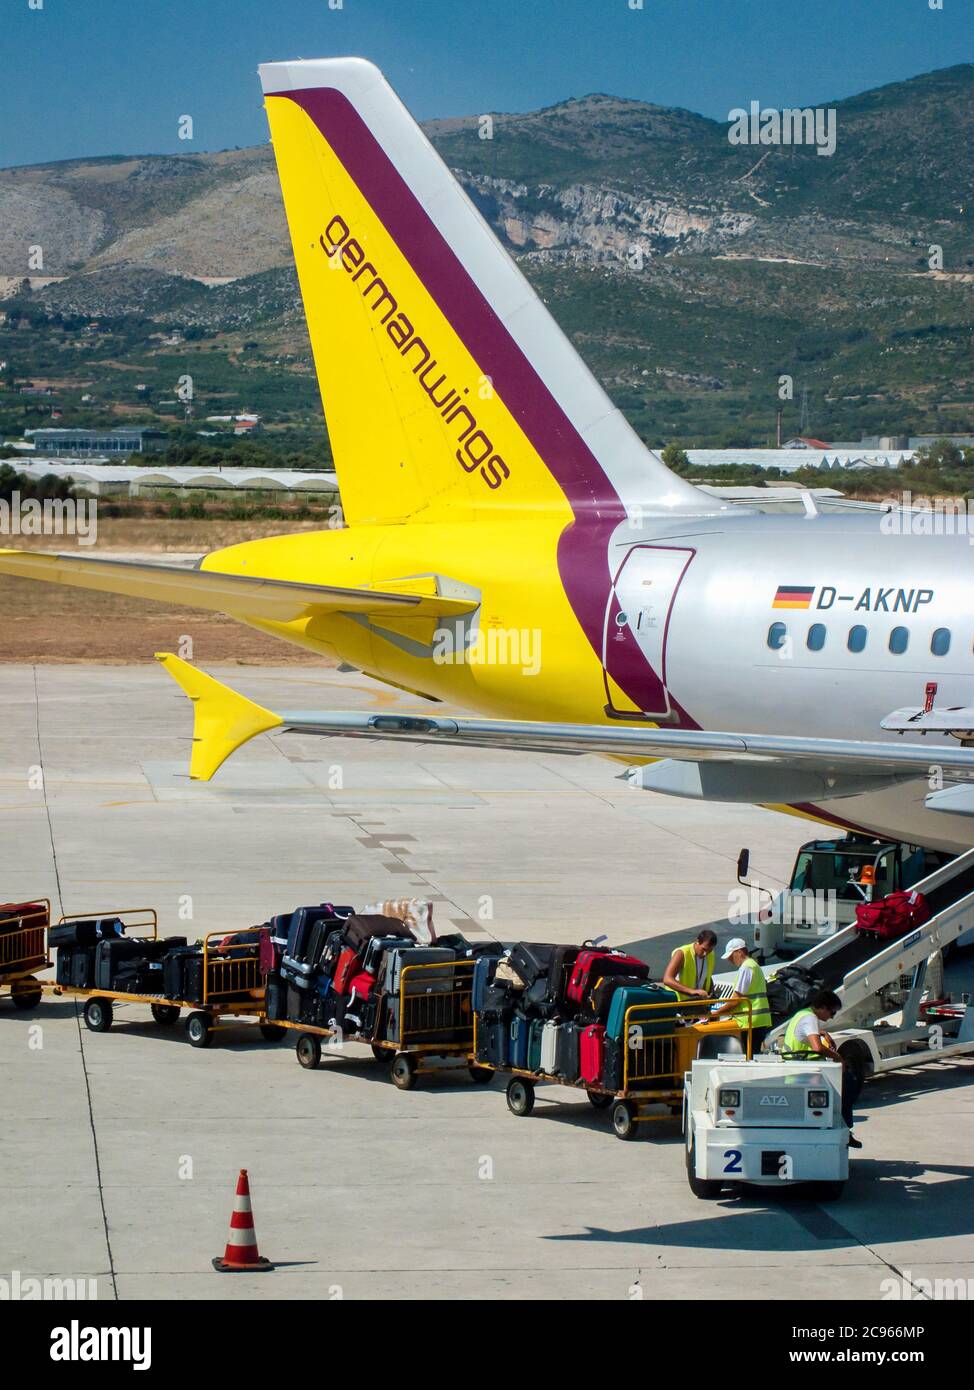 Split, Dalmatia, Croatia - At Split airport, luggage is loaded onto an aircraft of the German airline germanwings. Stock Photo